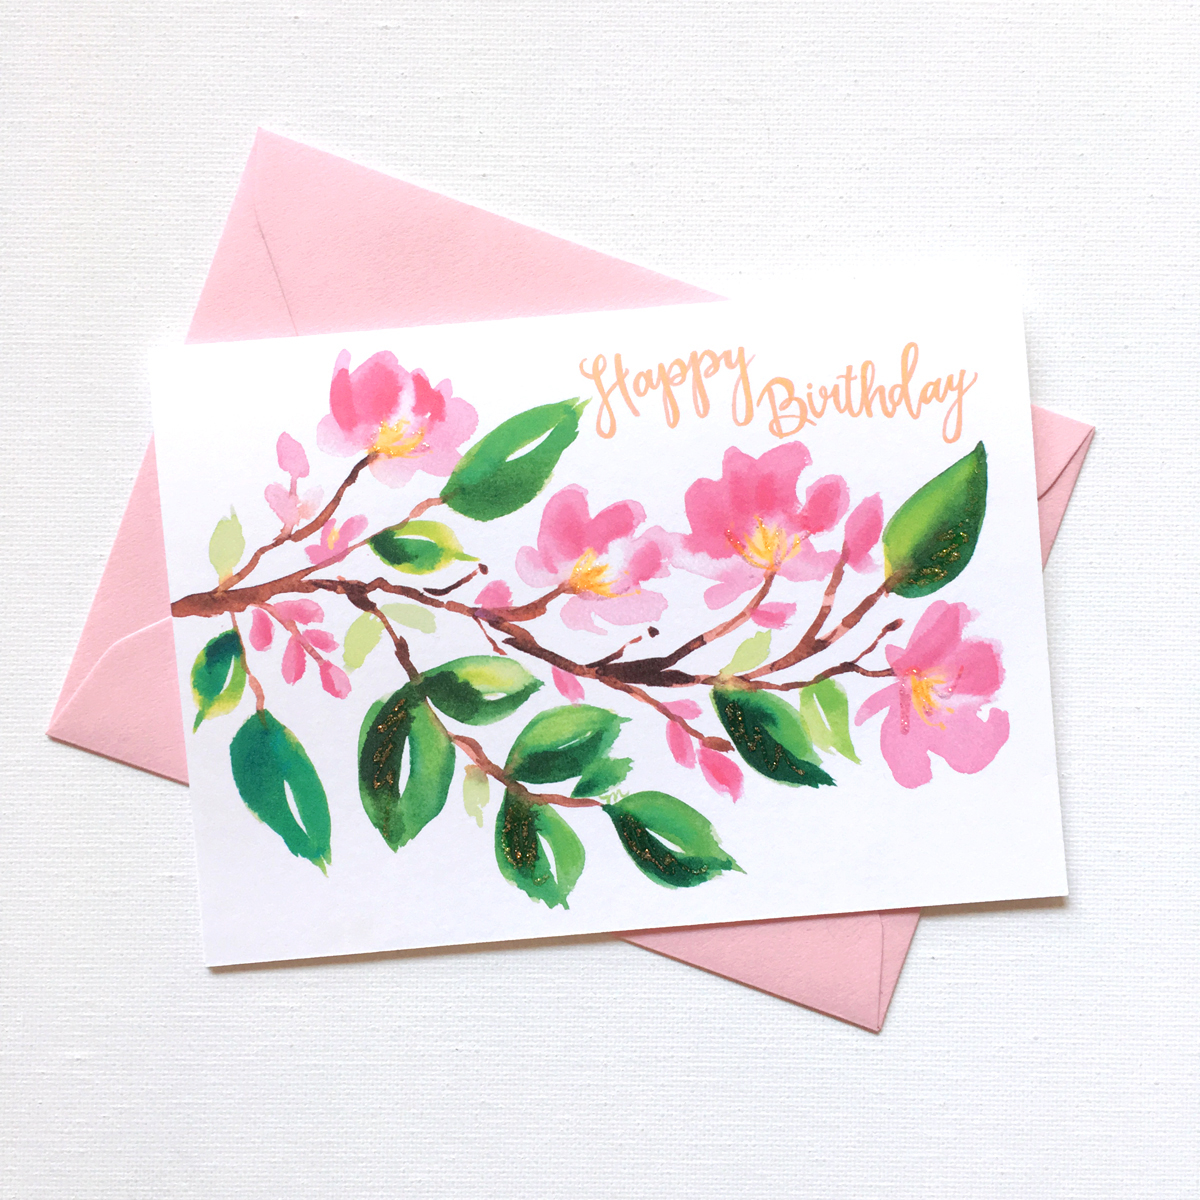 Ideas For Making Birthday Greeting Cards Watercolor Birthday Card Ideas At Getdrawings Free For